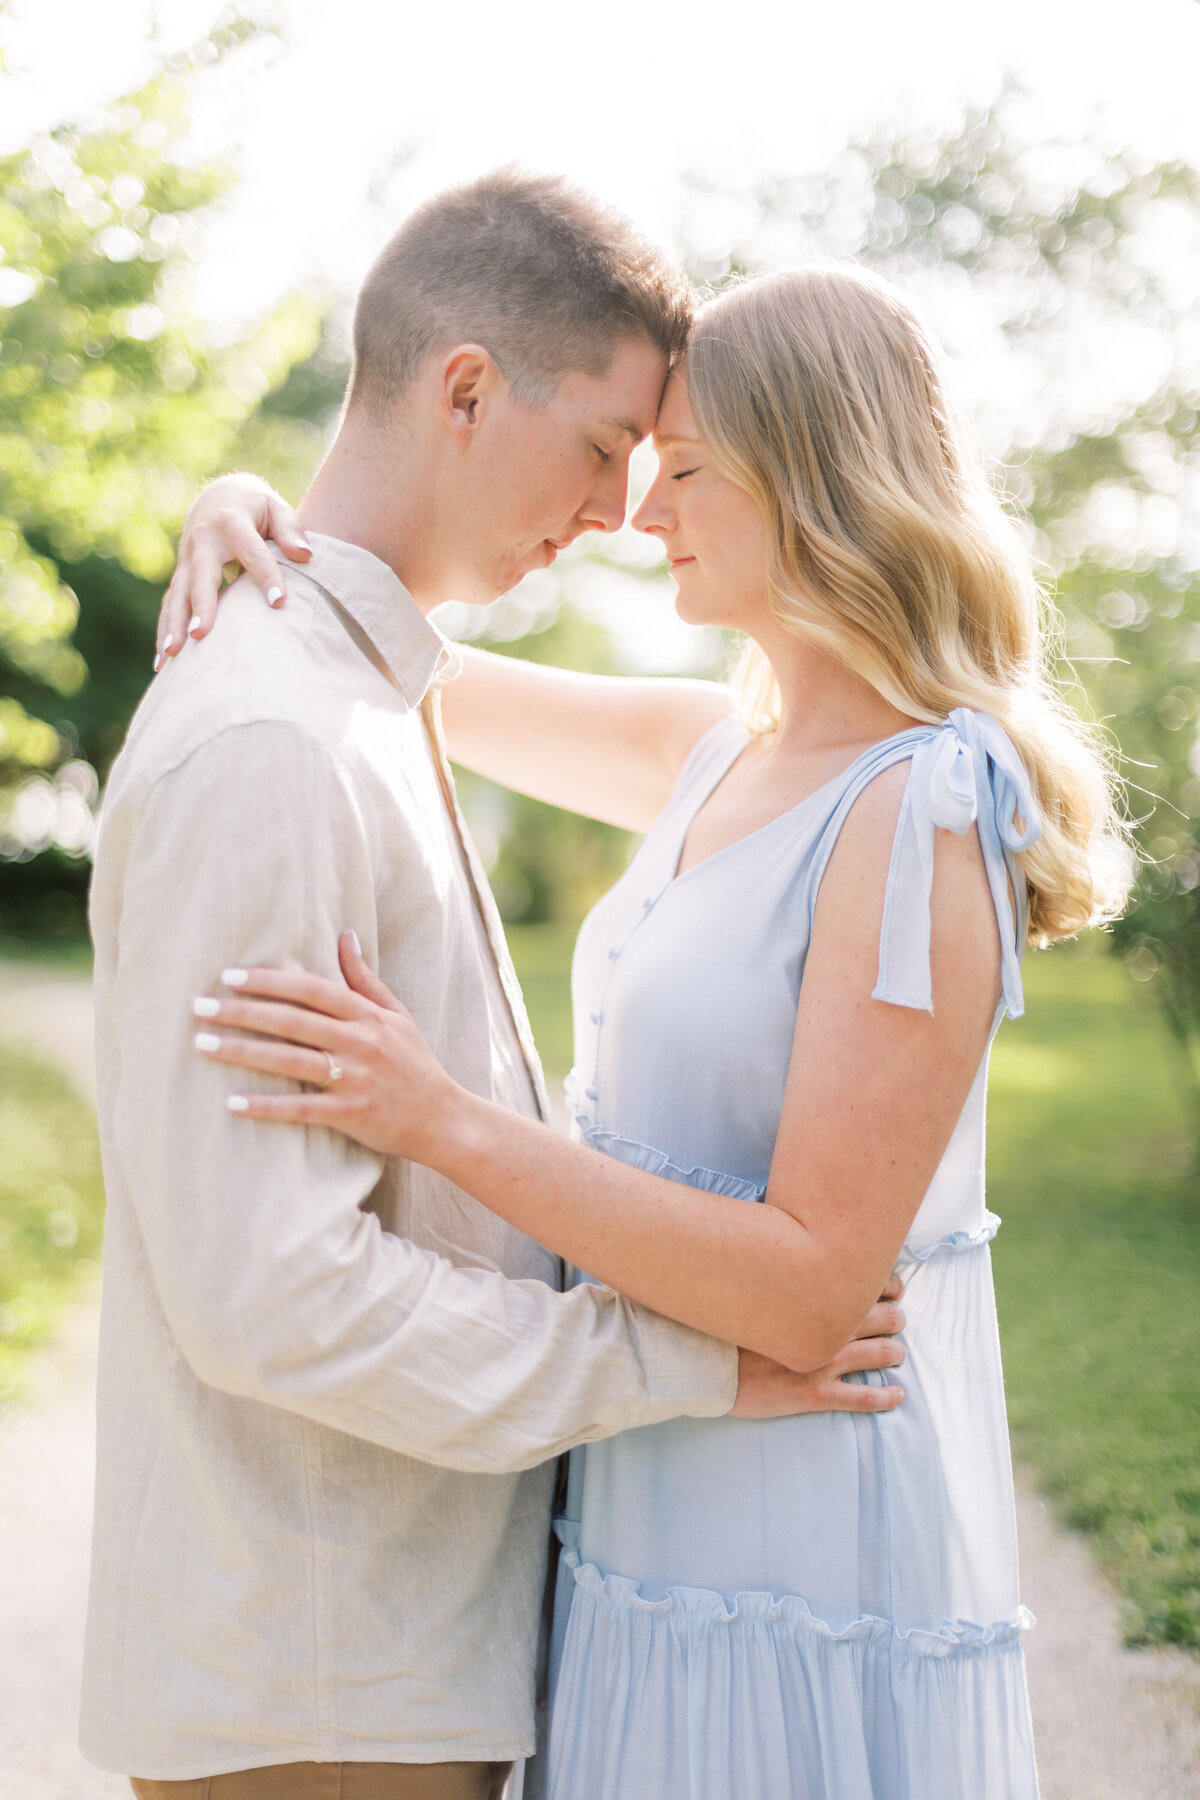 amber-rhea-photography-midwest-wedding-photographer-stl-engagement210A4746